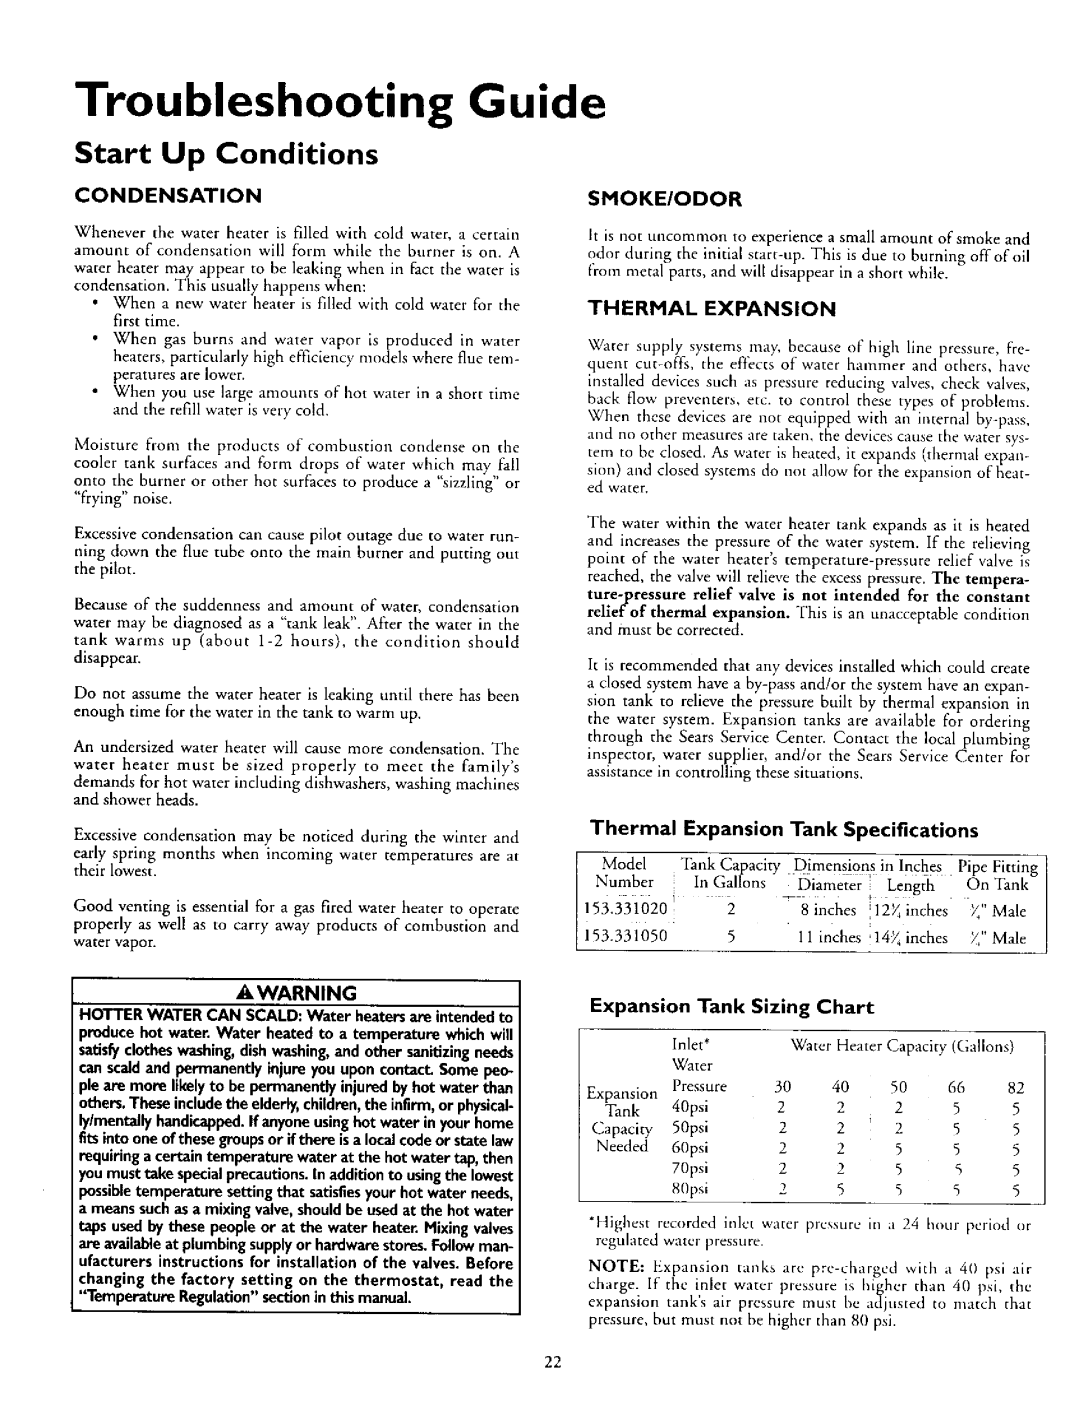 Kenmore 153.330552 Troubleshooting Guide, Start Up Conditions, Condensation, Thermal Expansion, Tank Specifications 